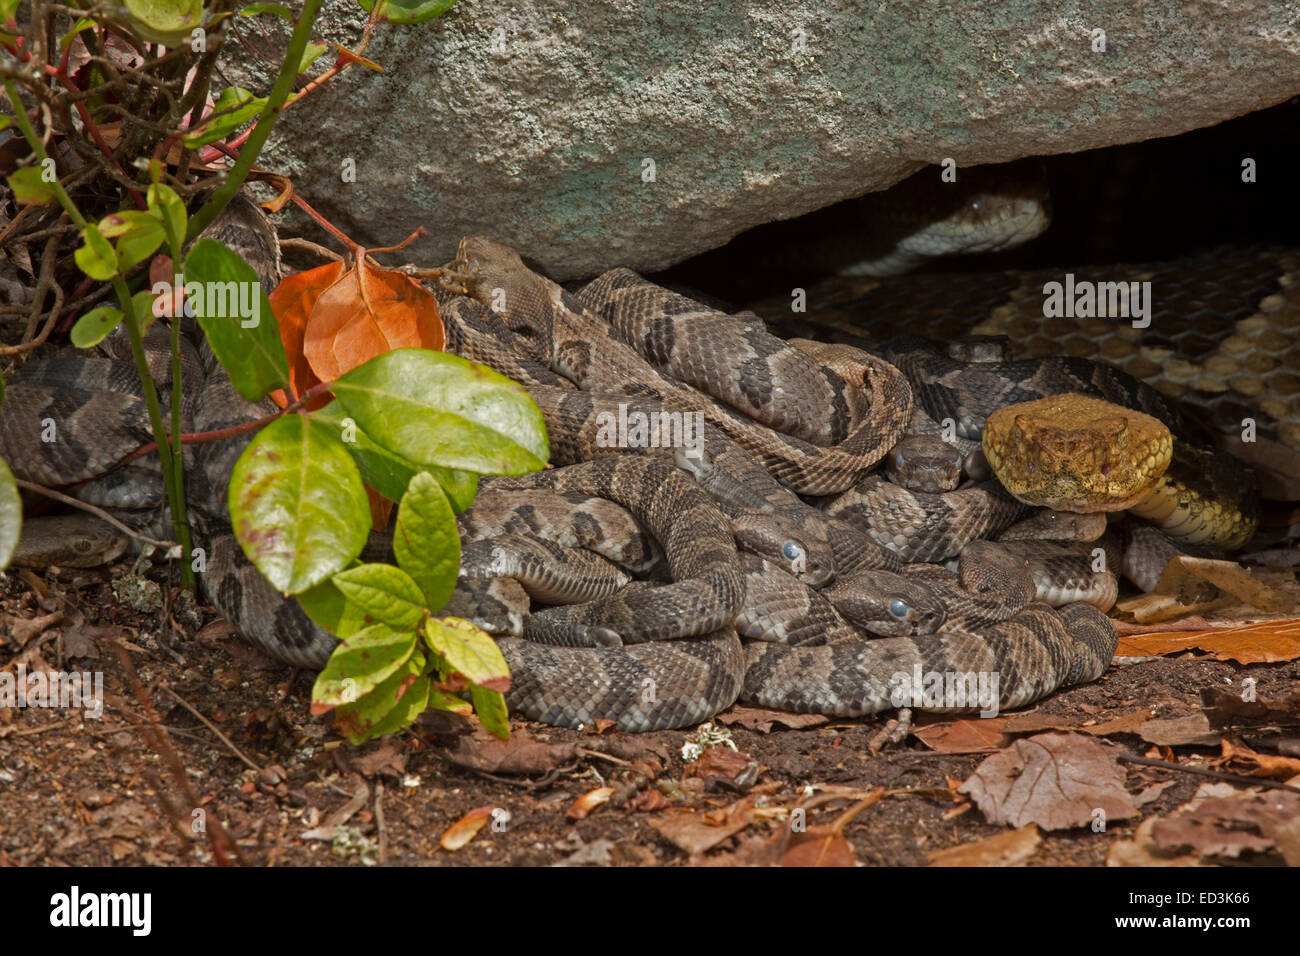 Timber rattlesnakes, newborn young with adult female, Pennsylvania Stock Photo